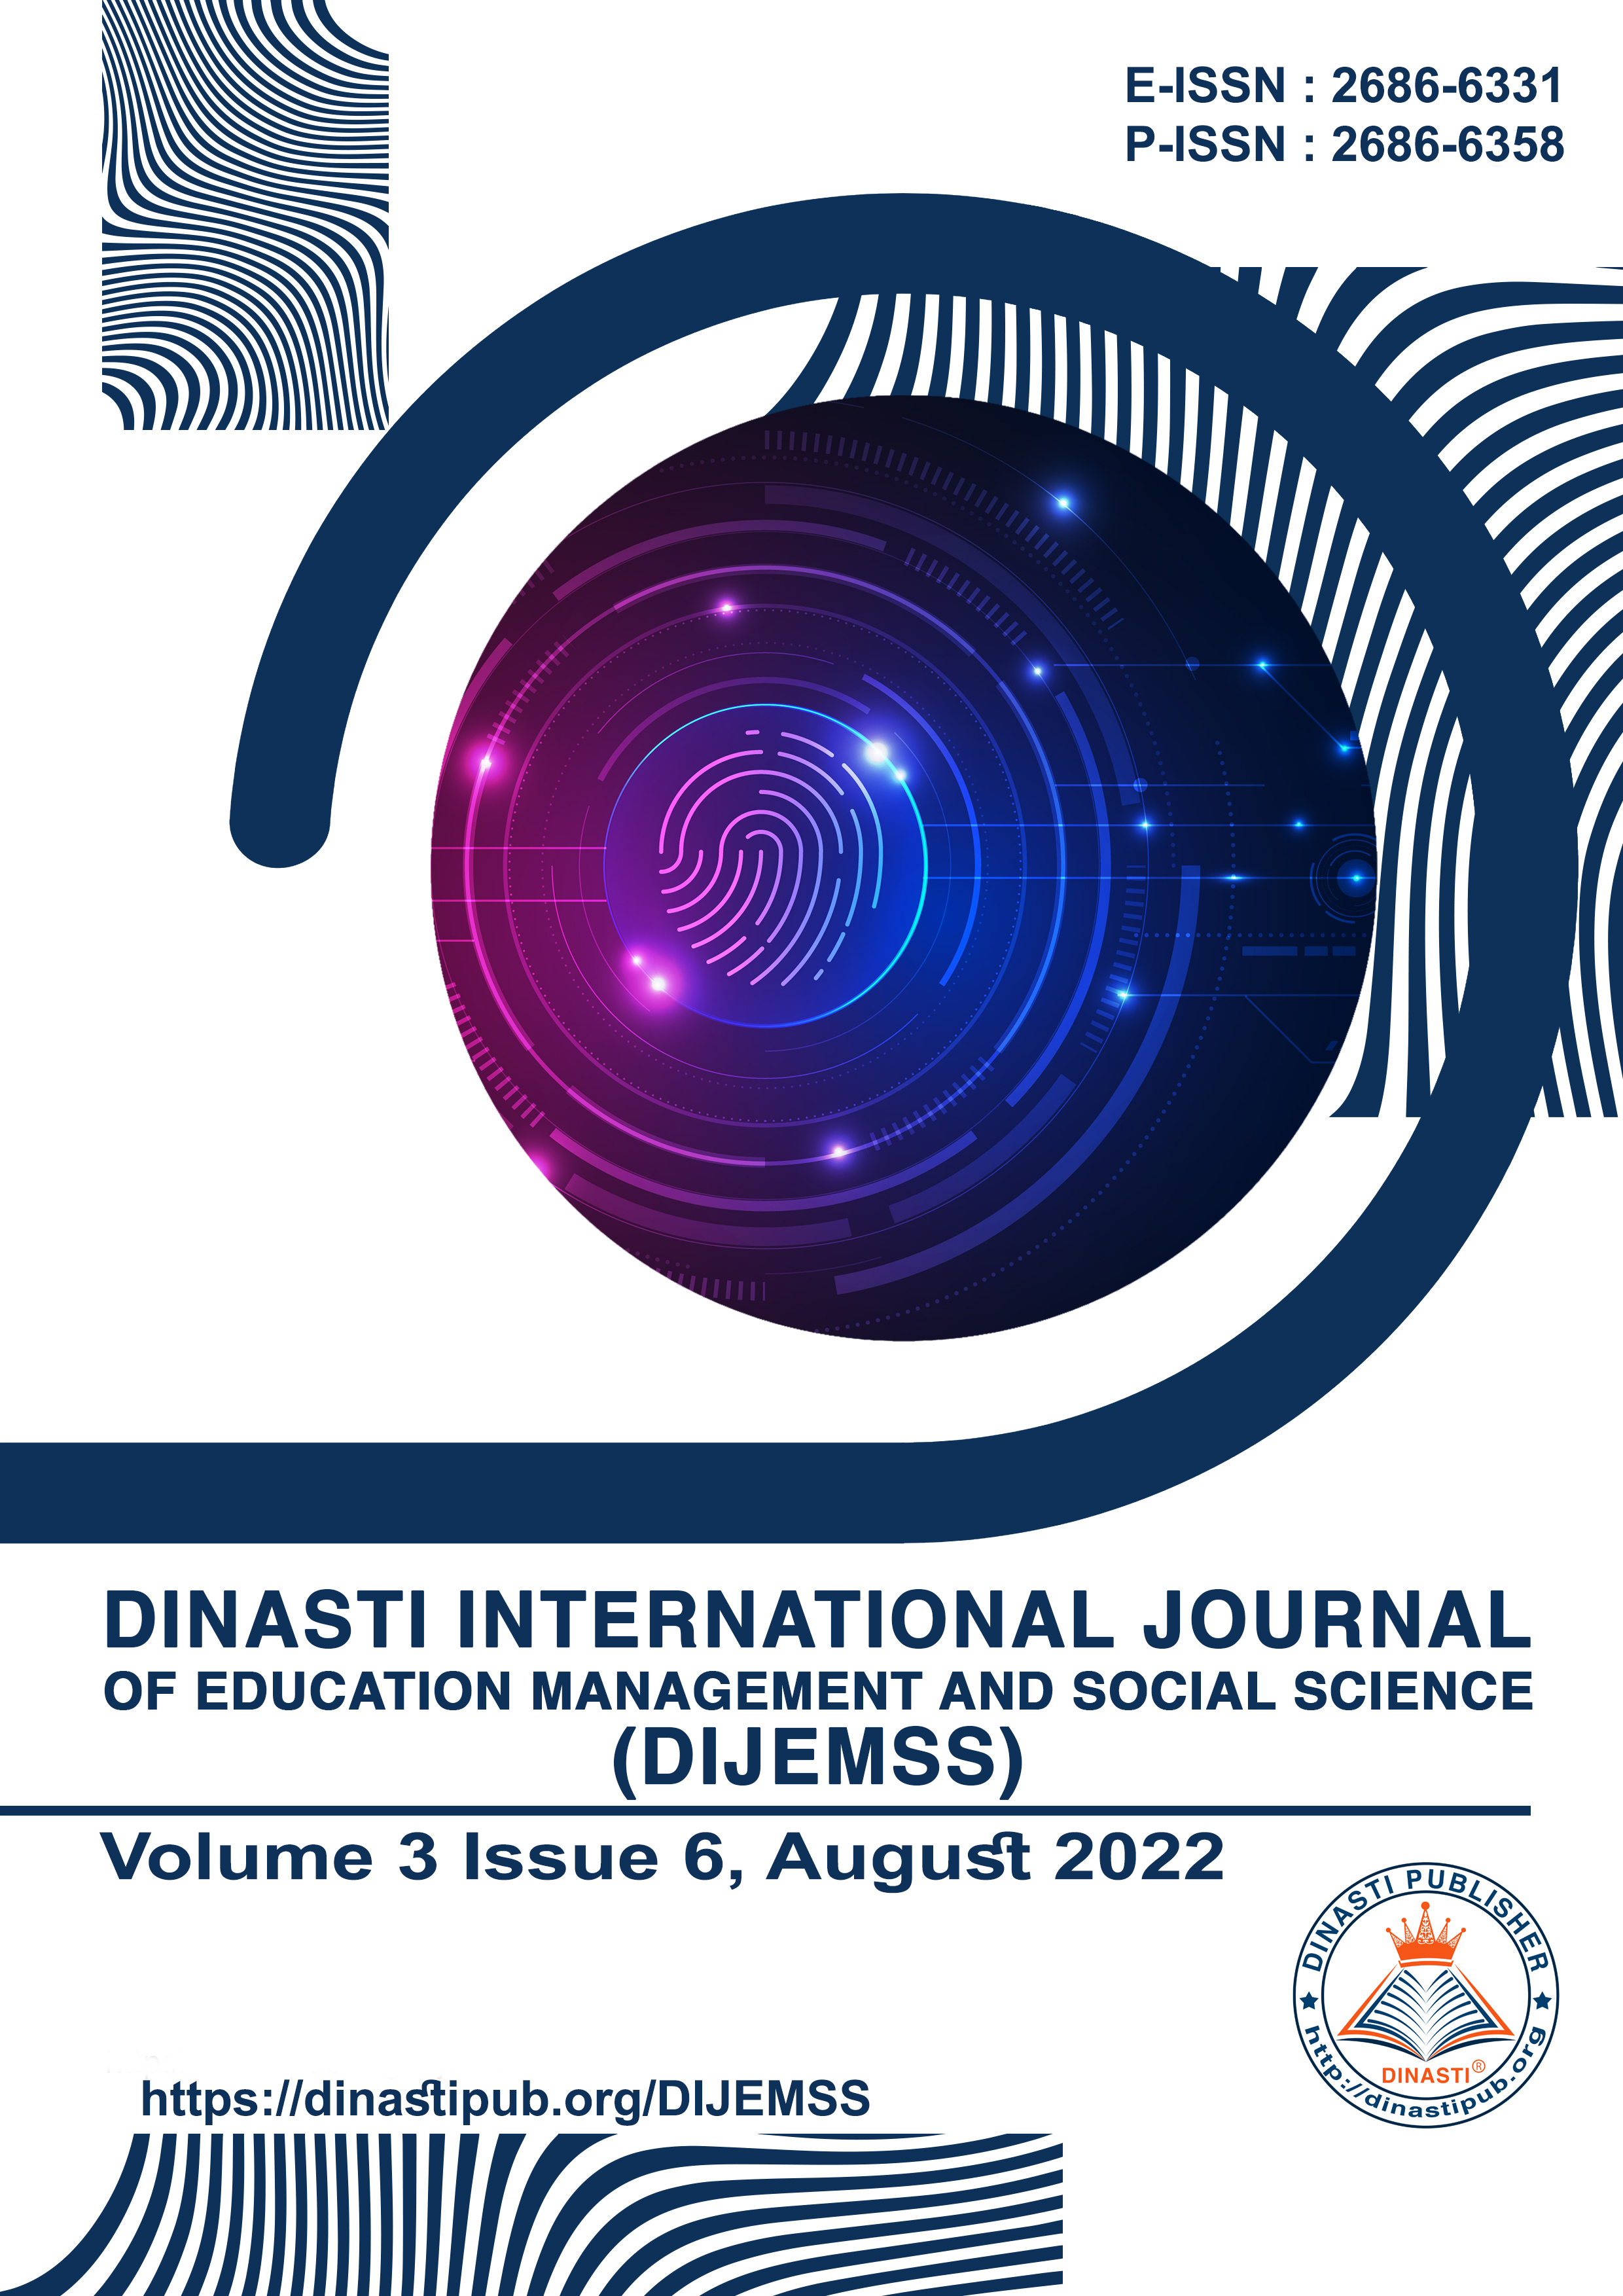 					View Vol. 3 No. 6 (2022): Dinasti International Journal of Education Management and Social Science (August - September 2022)
				